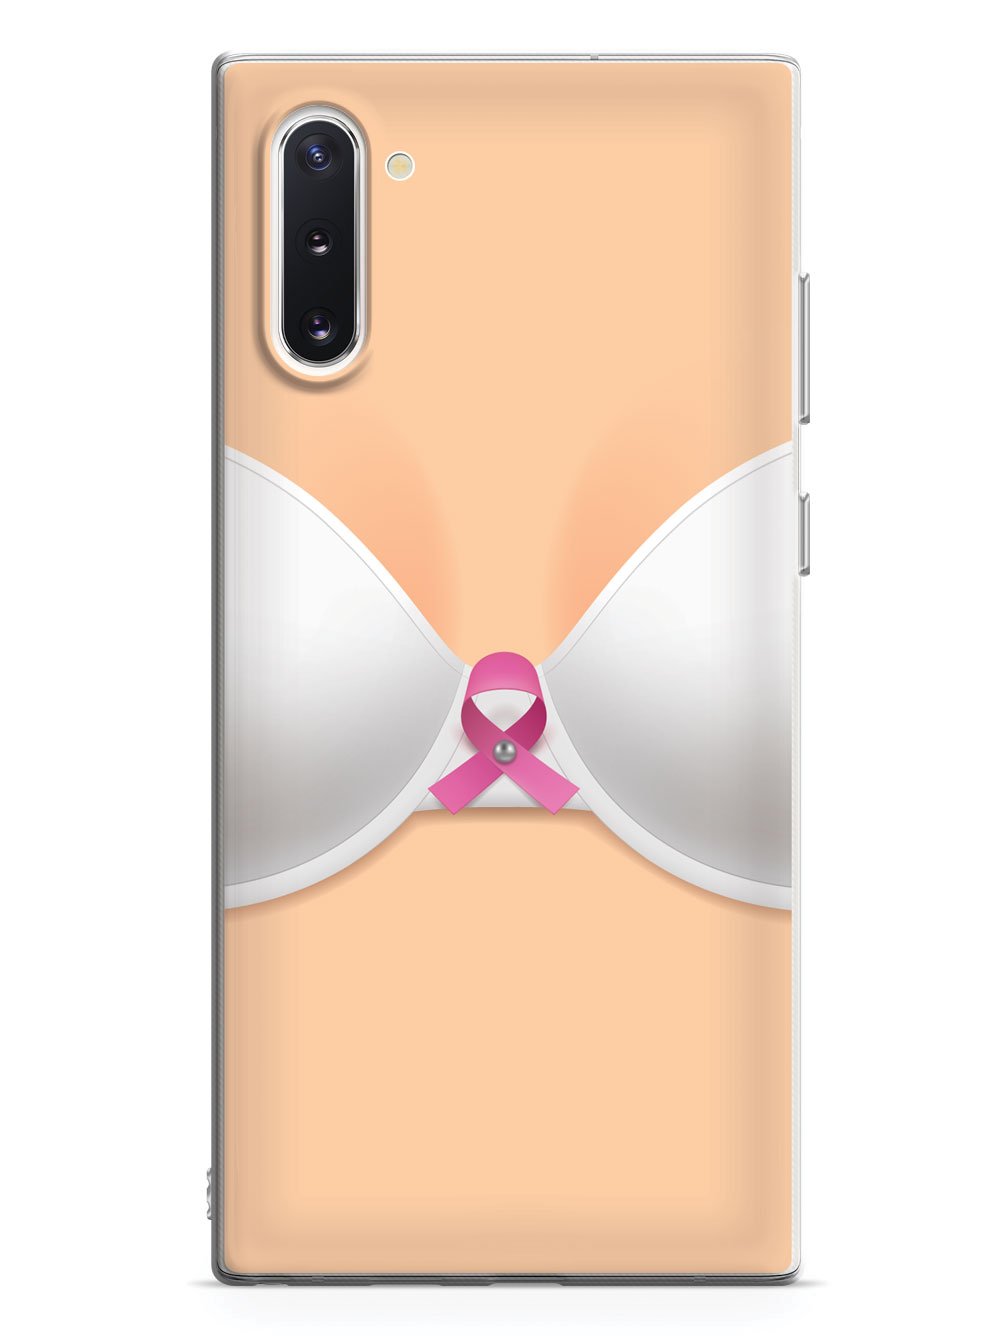 White Bra with Pink Ribbon - Breast Cancer Awareness Case